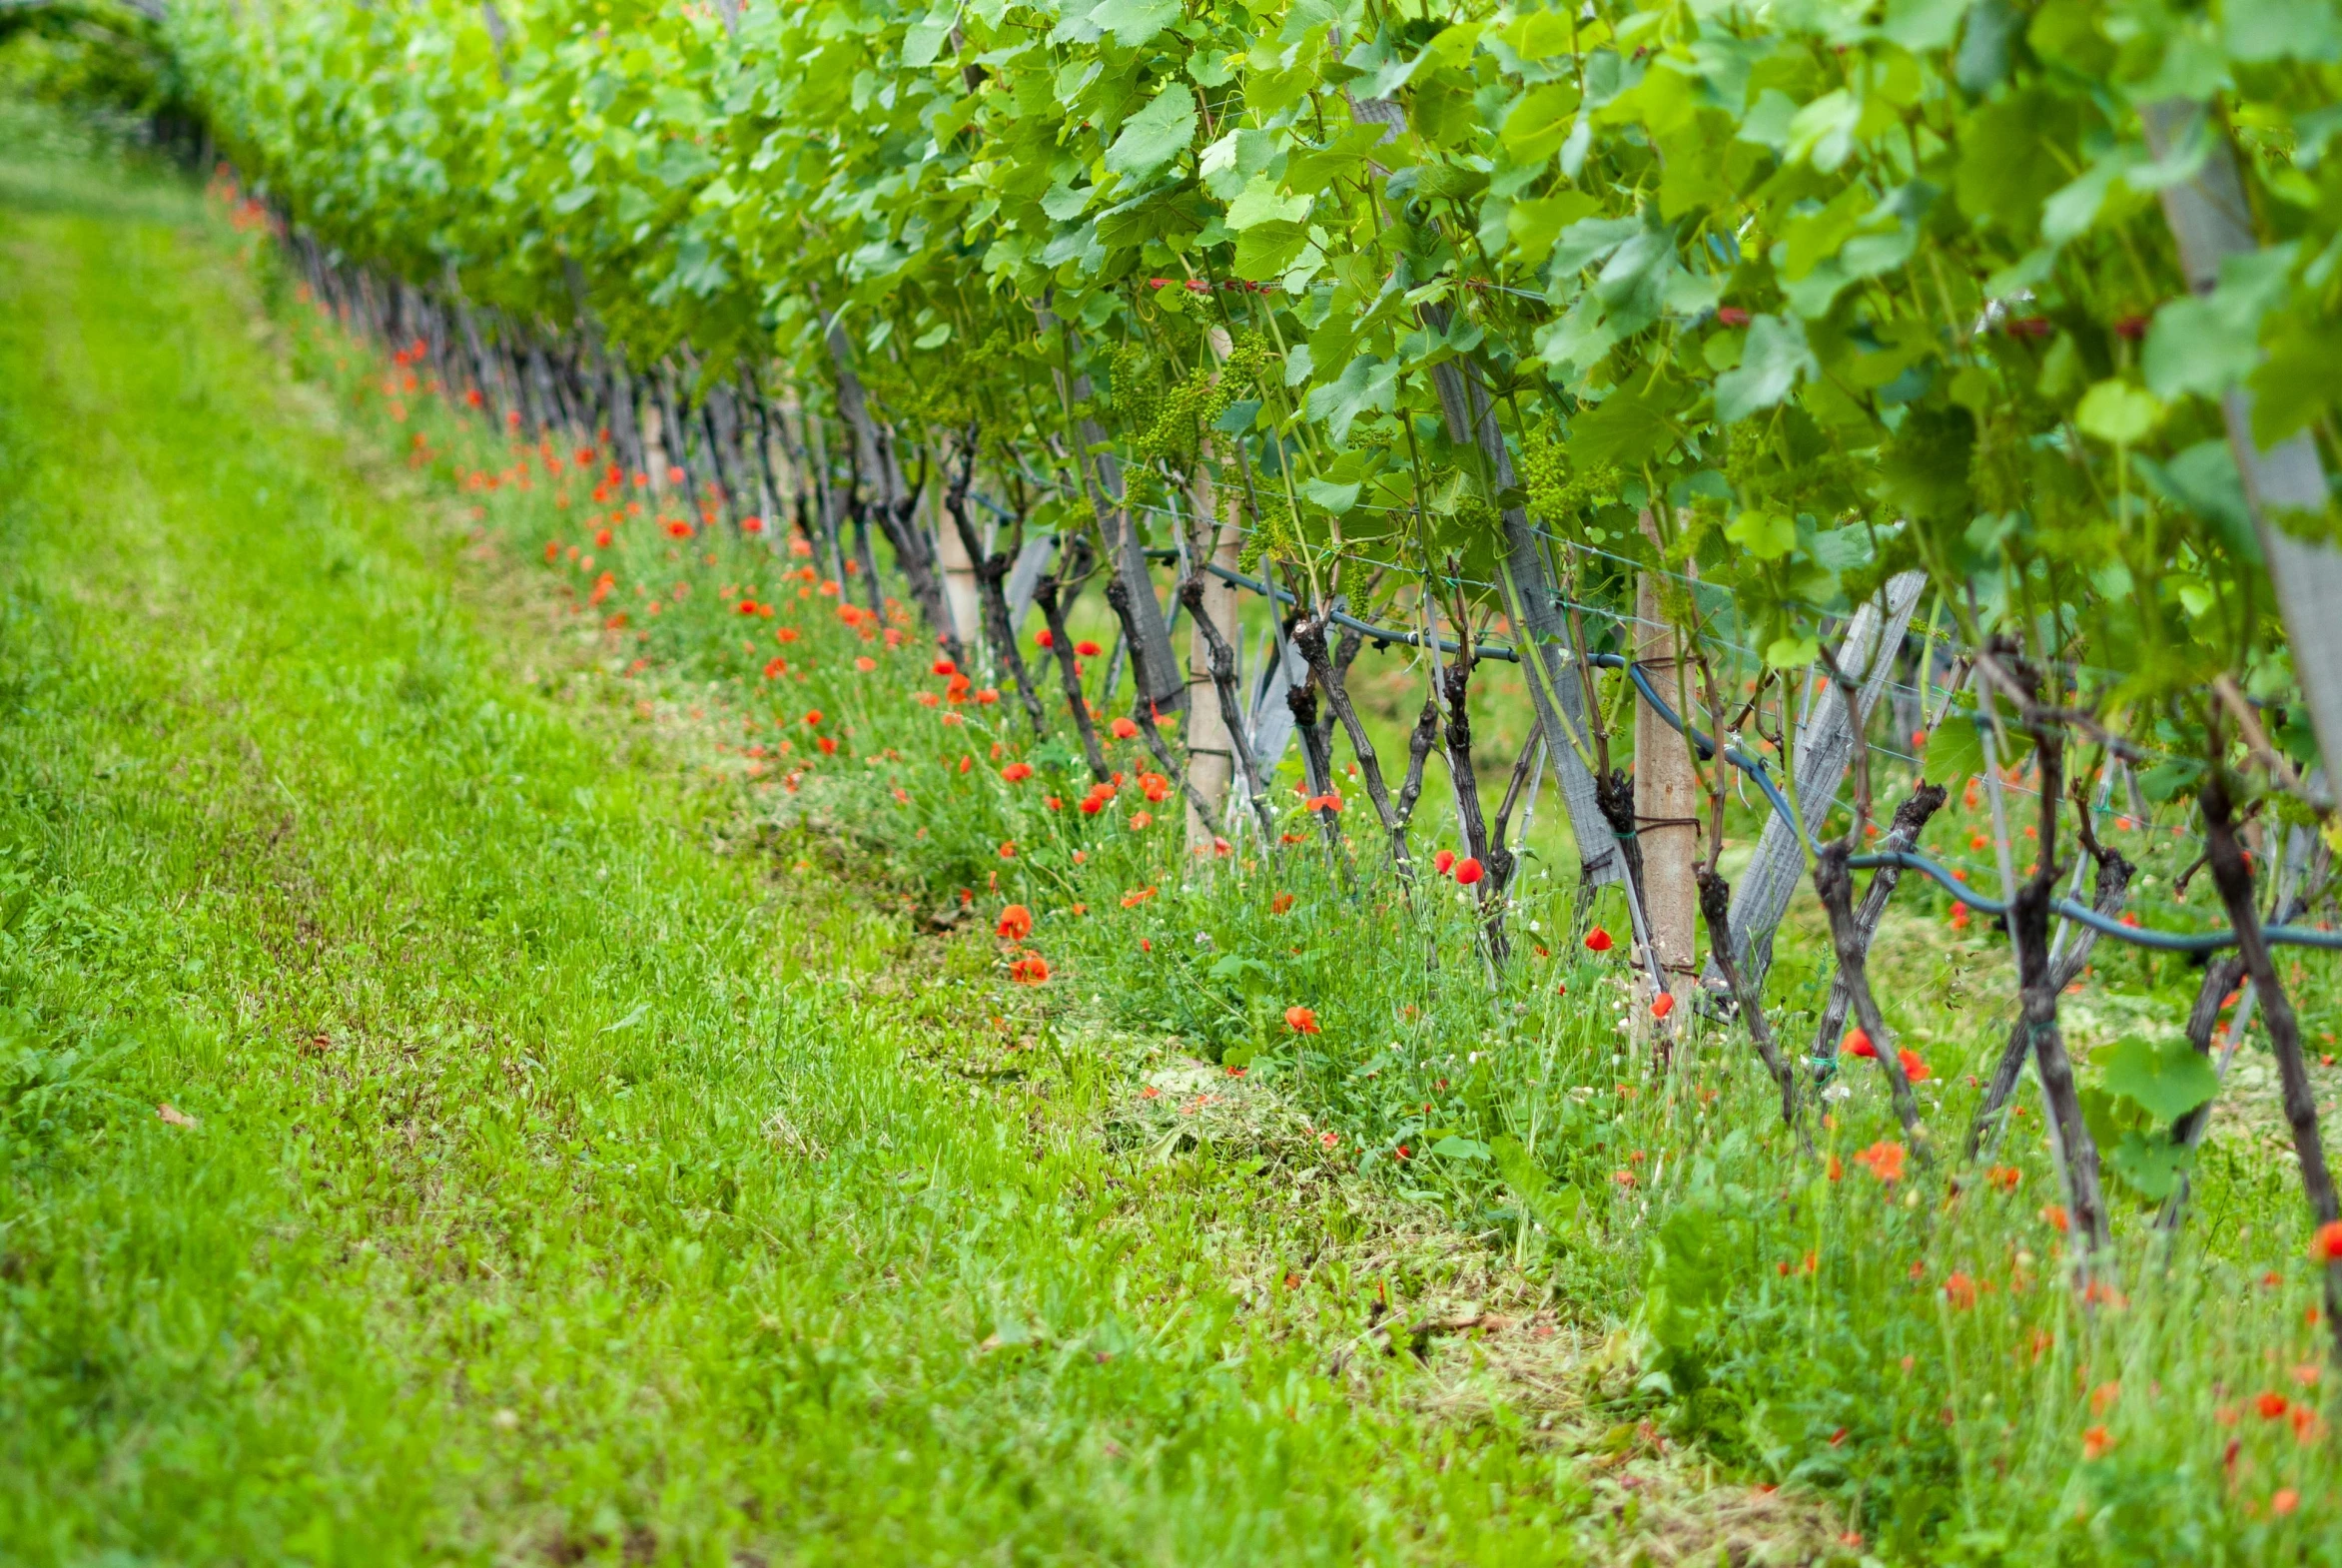 a row of vines with red flowers in the foreground, lush green, maintenance photo, subtle vibrancy, high quality product image”